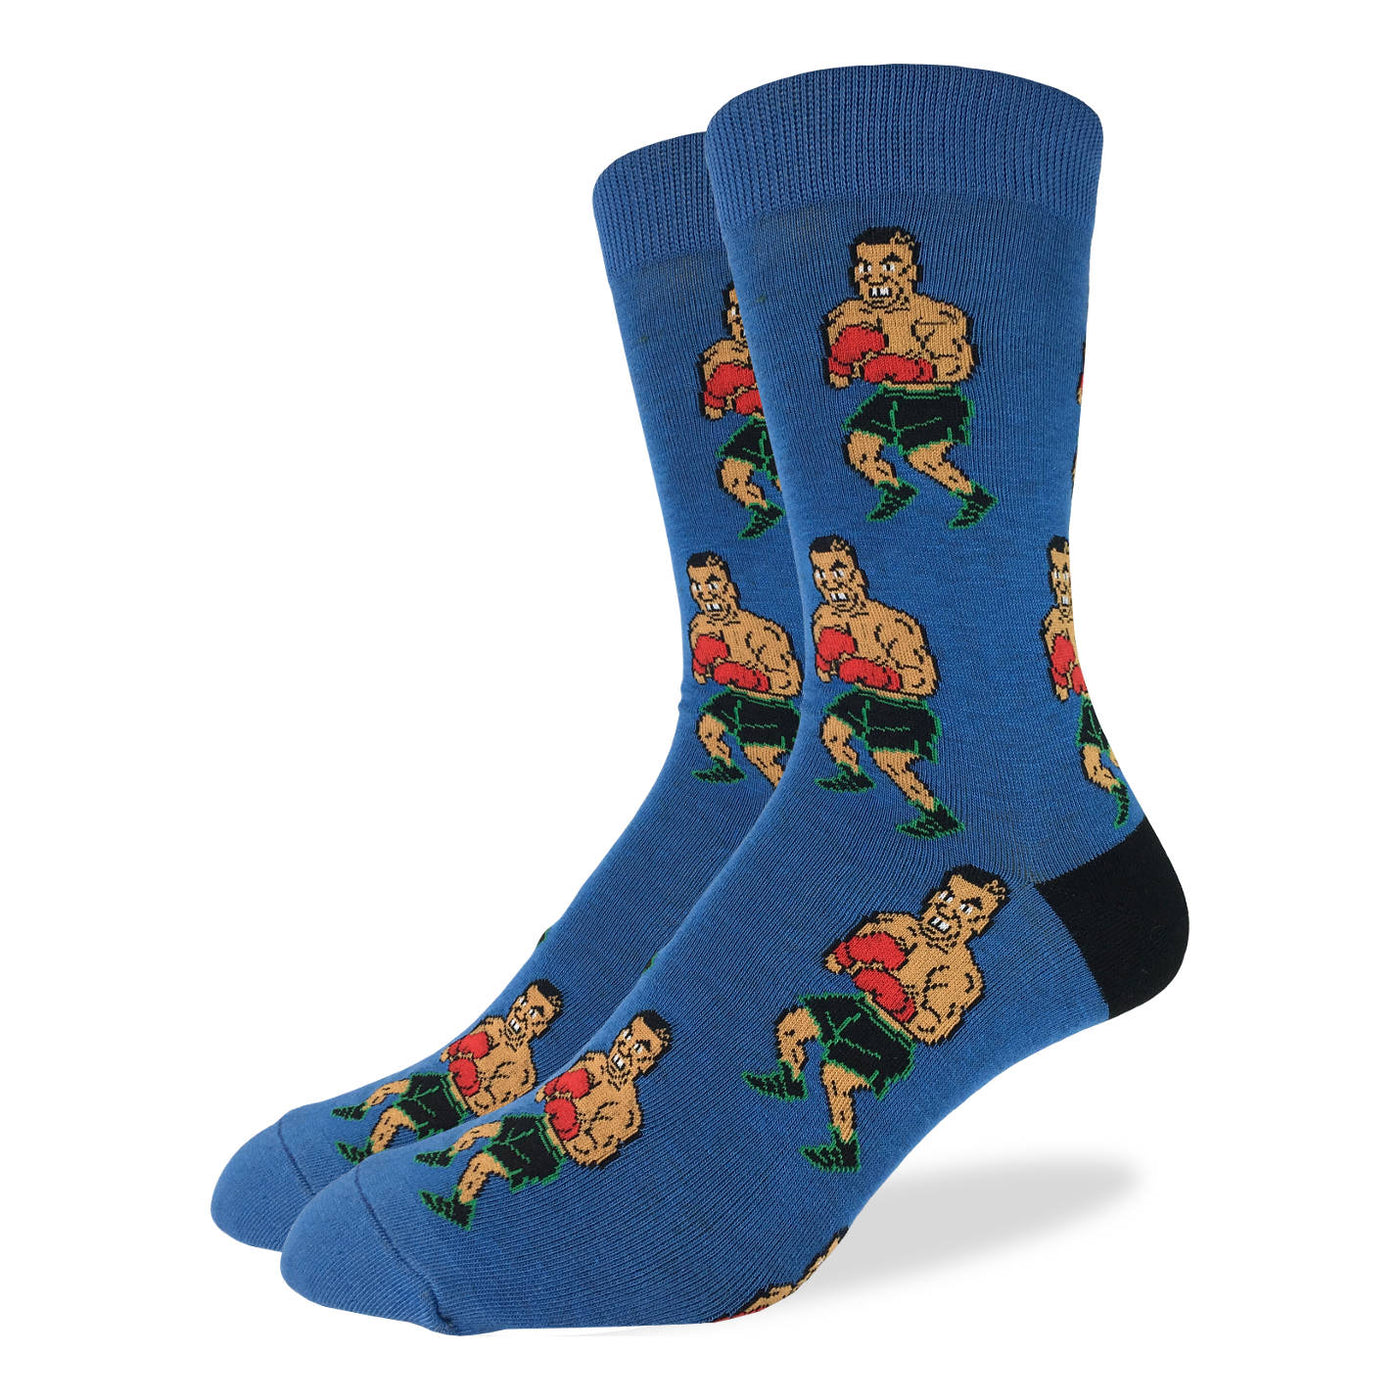 "Tyson Punch Out" Cotton Crew Socks by Good Luck Sock